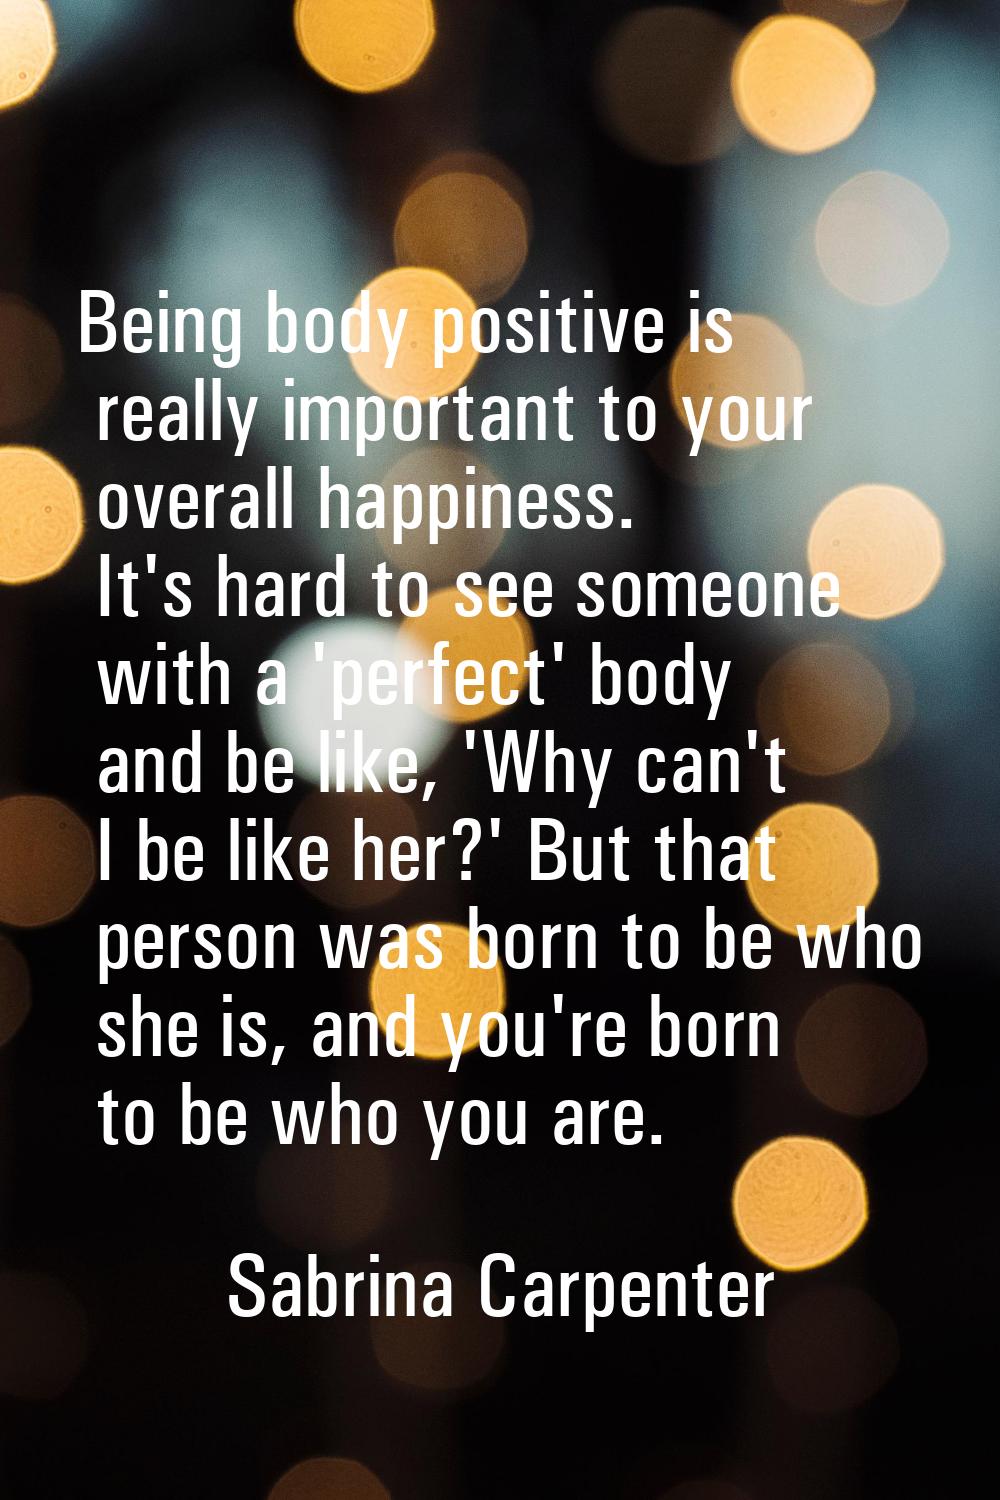 Being body positive is really important to your overall happiness. It's hard to see someone with a 